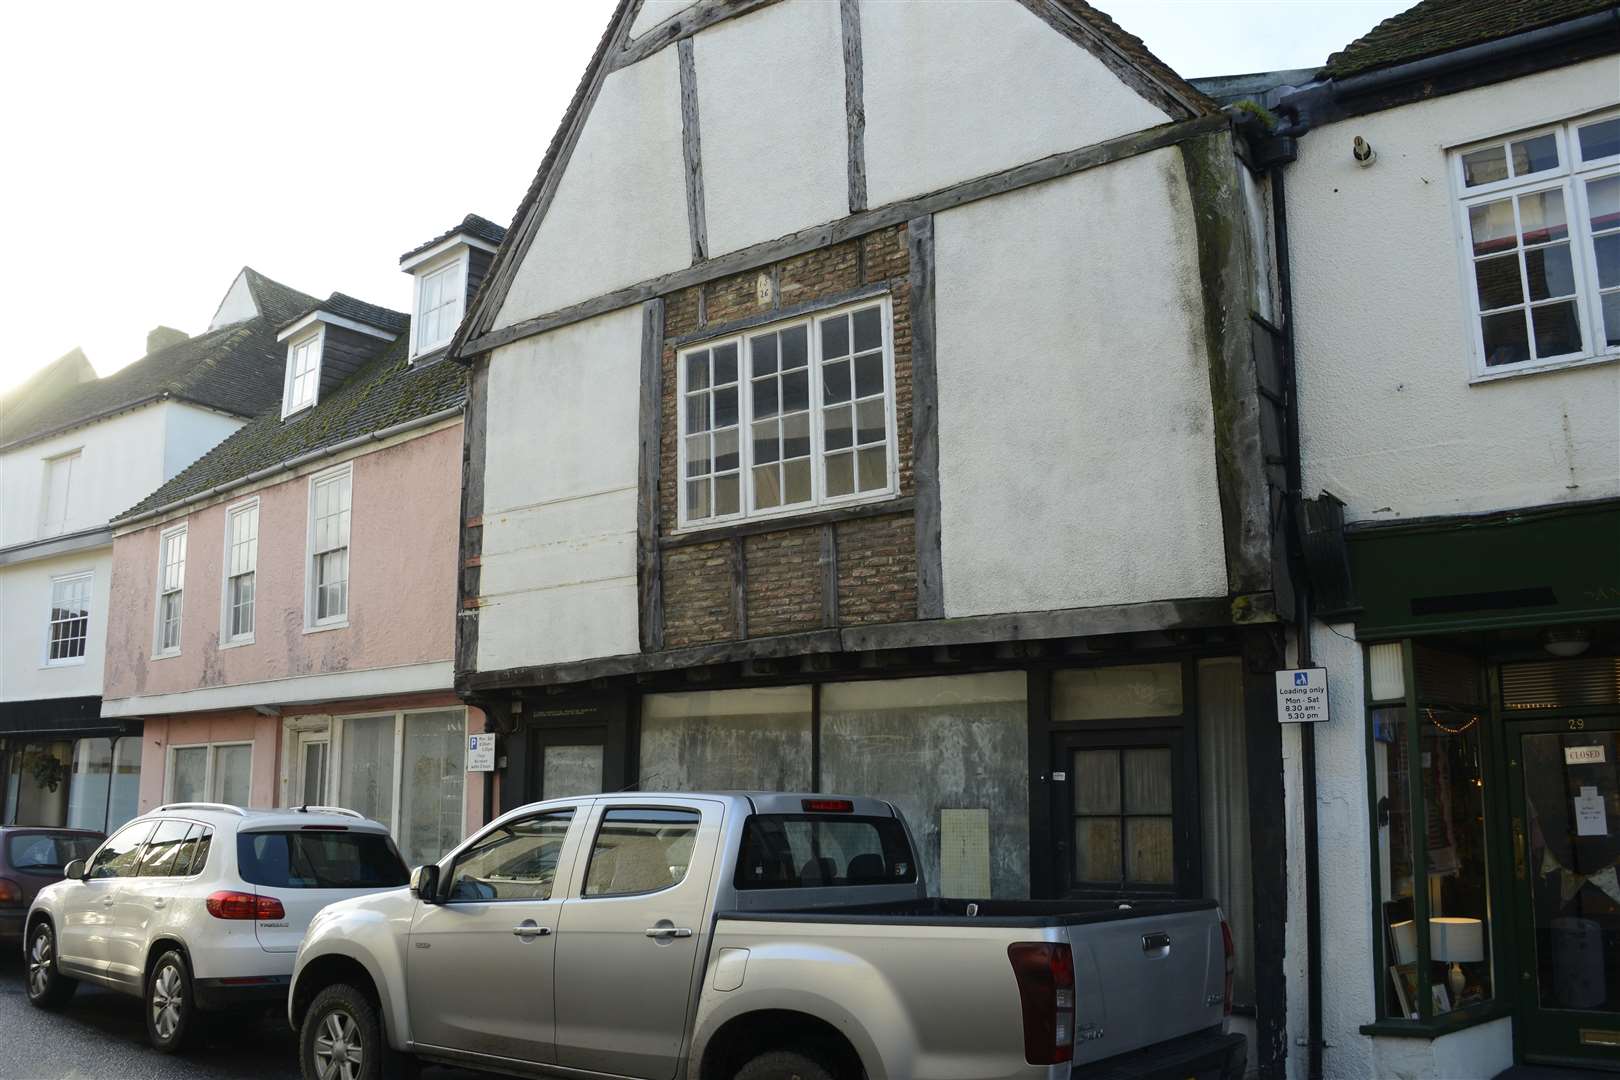 The run-down properties are in Strand Street, Sandwich, and make up part of what is thought to be the longest block of medieval timber-framed buildings still in use in England